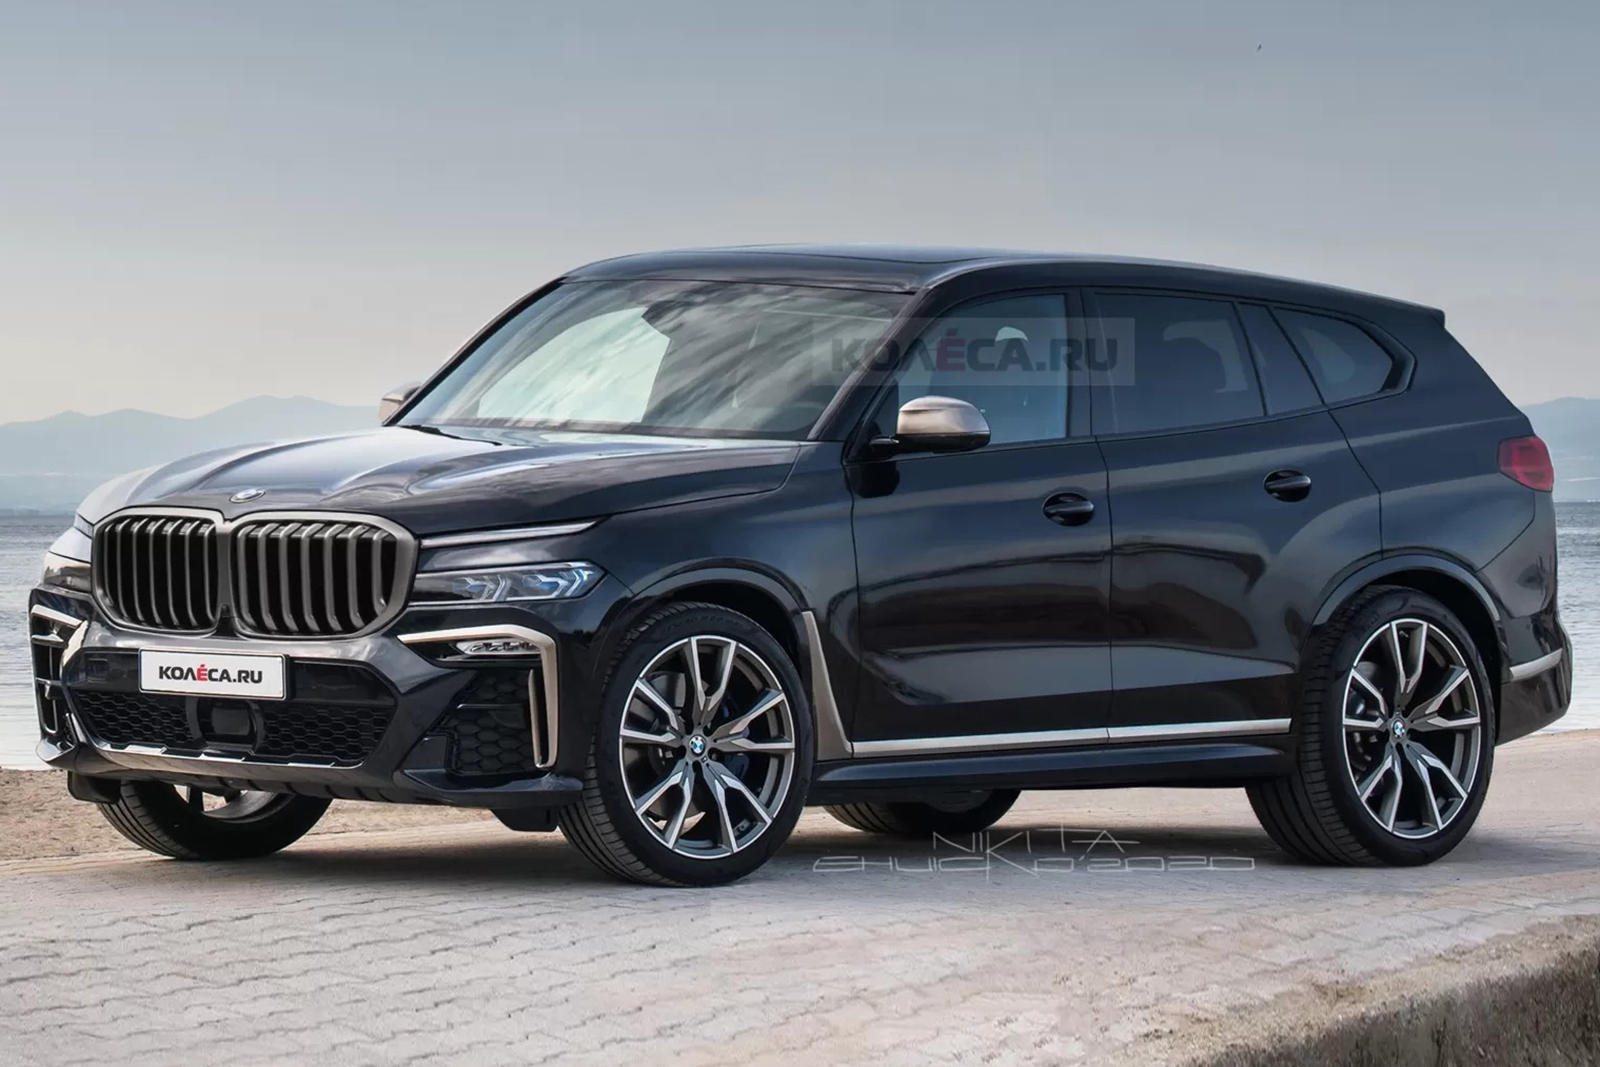 We Hope The BMW X8 Doesn't Look This Bad